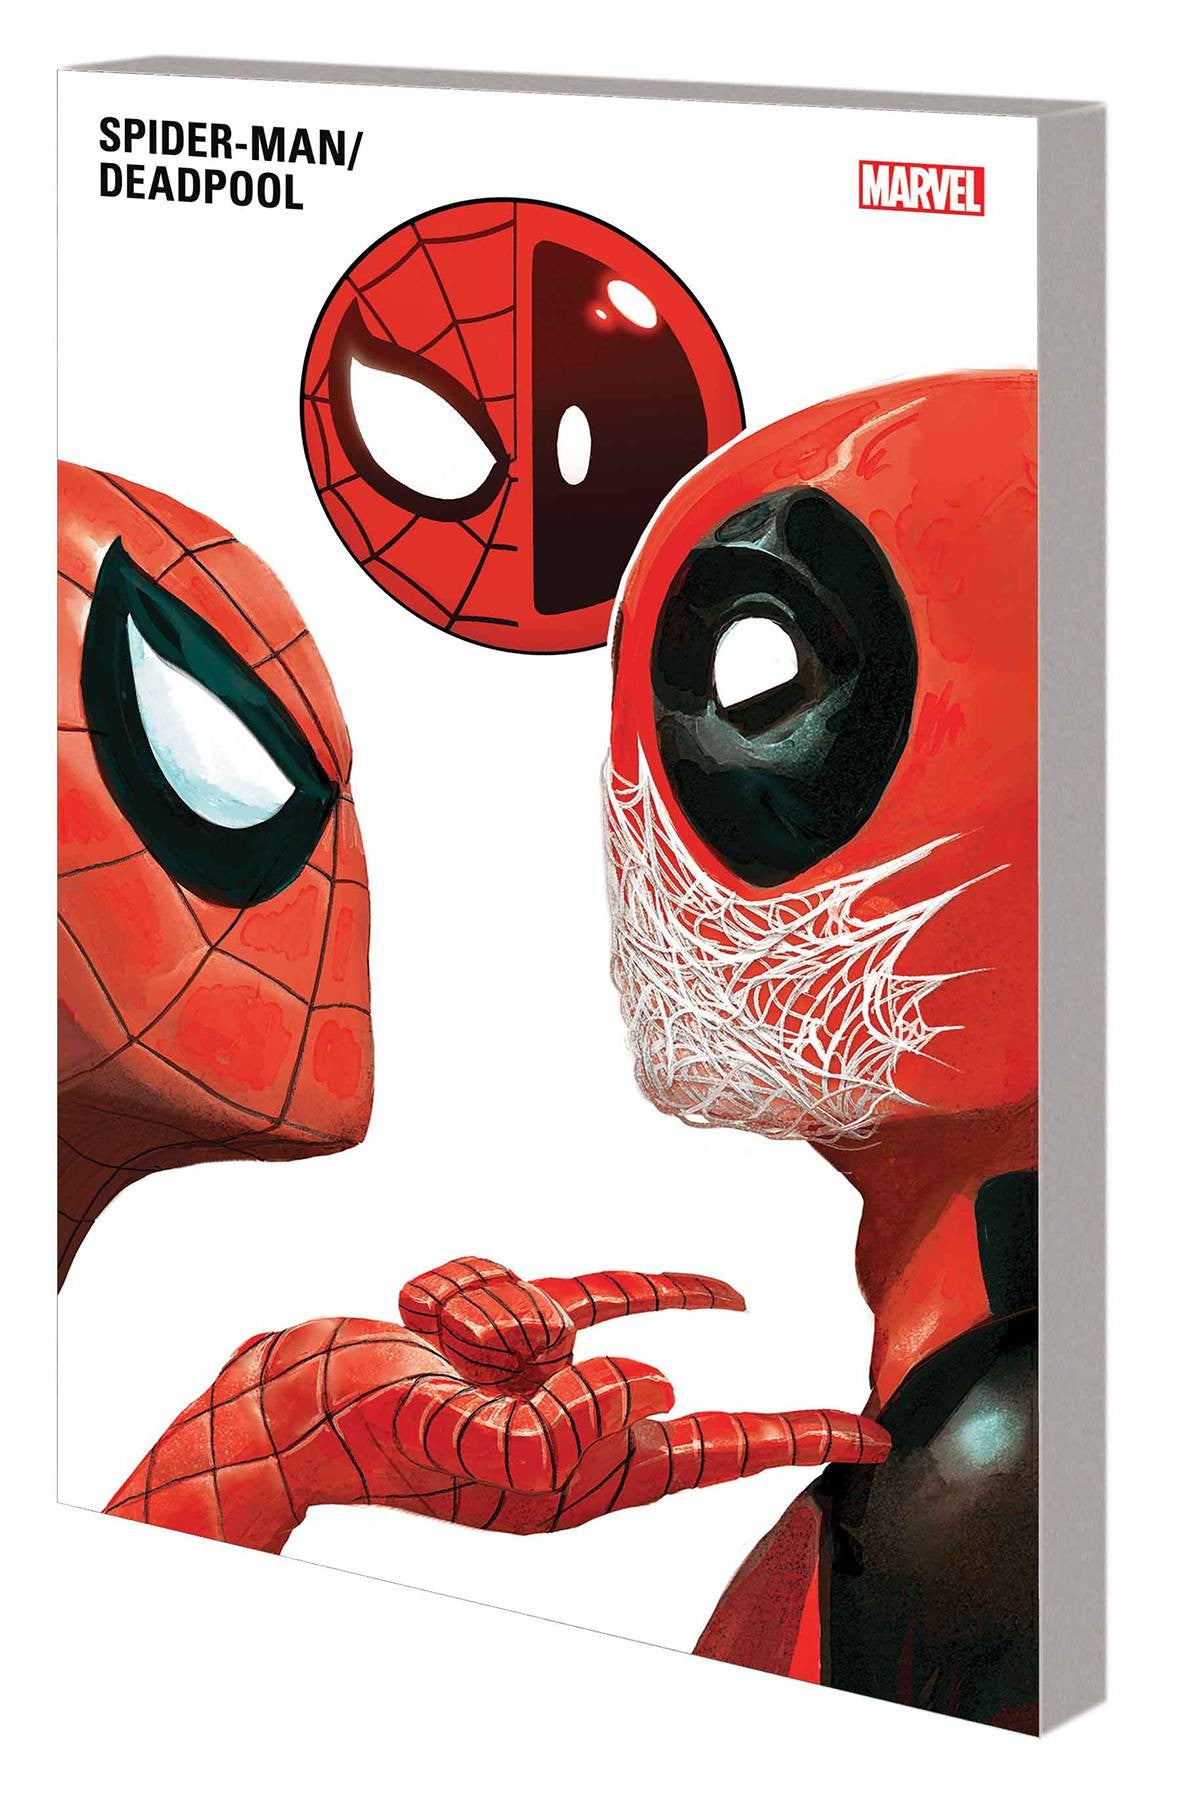 SPIDER-MAN DEADPOOL TP VOL 02 SIDE PIECES COVER